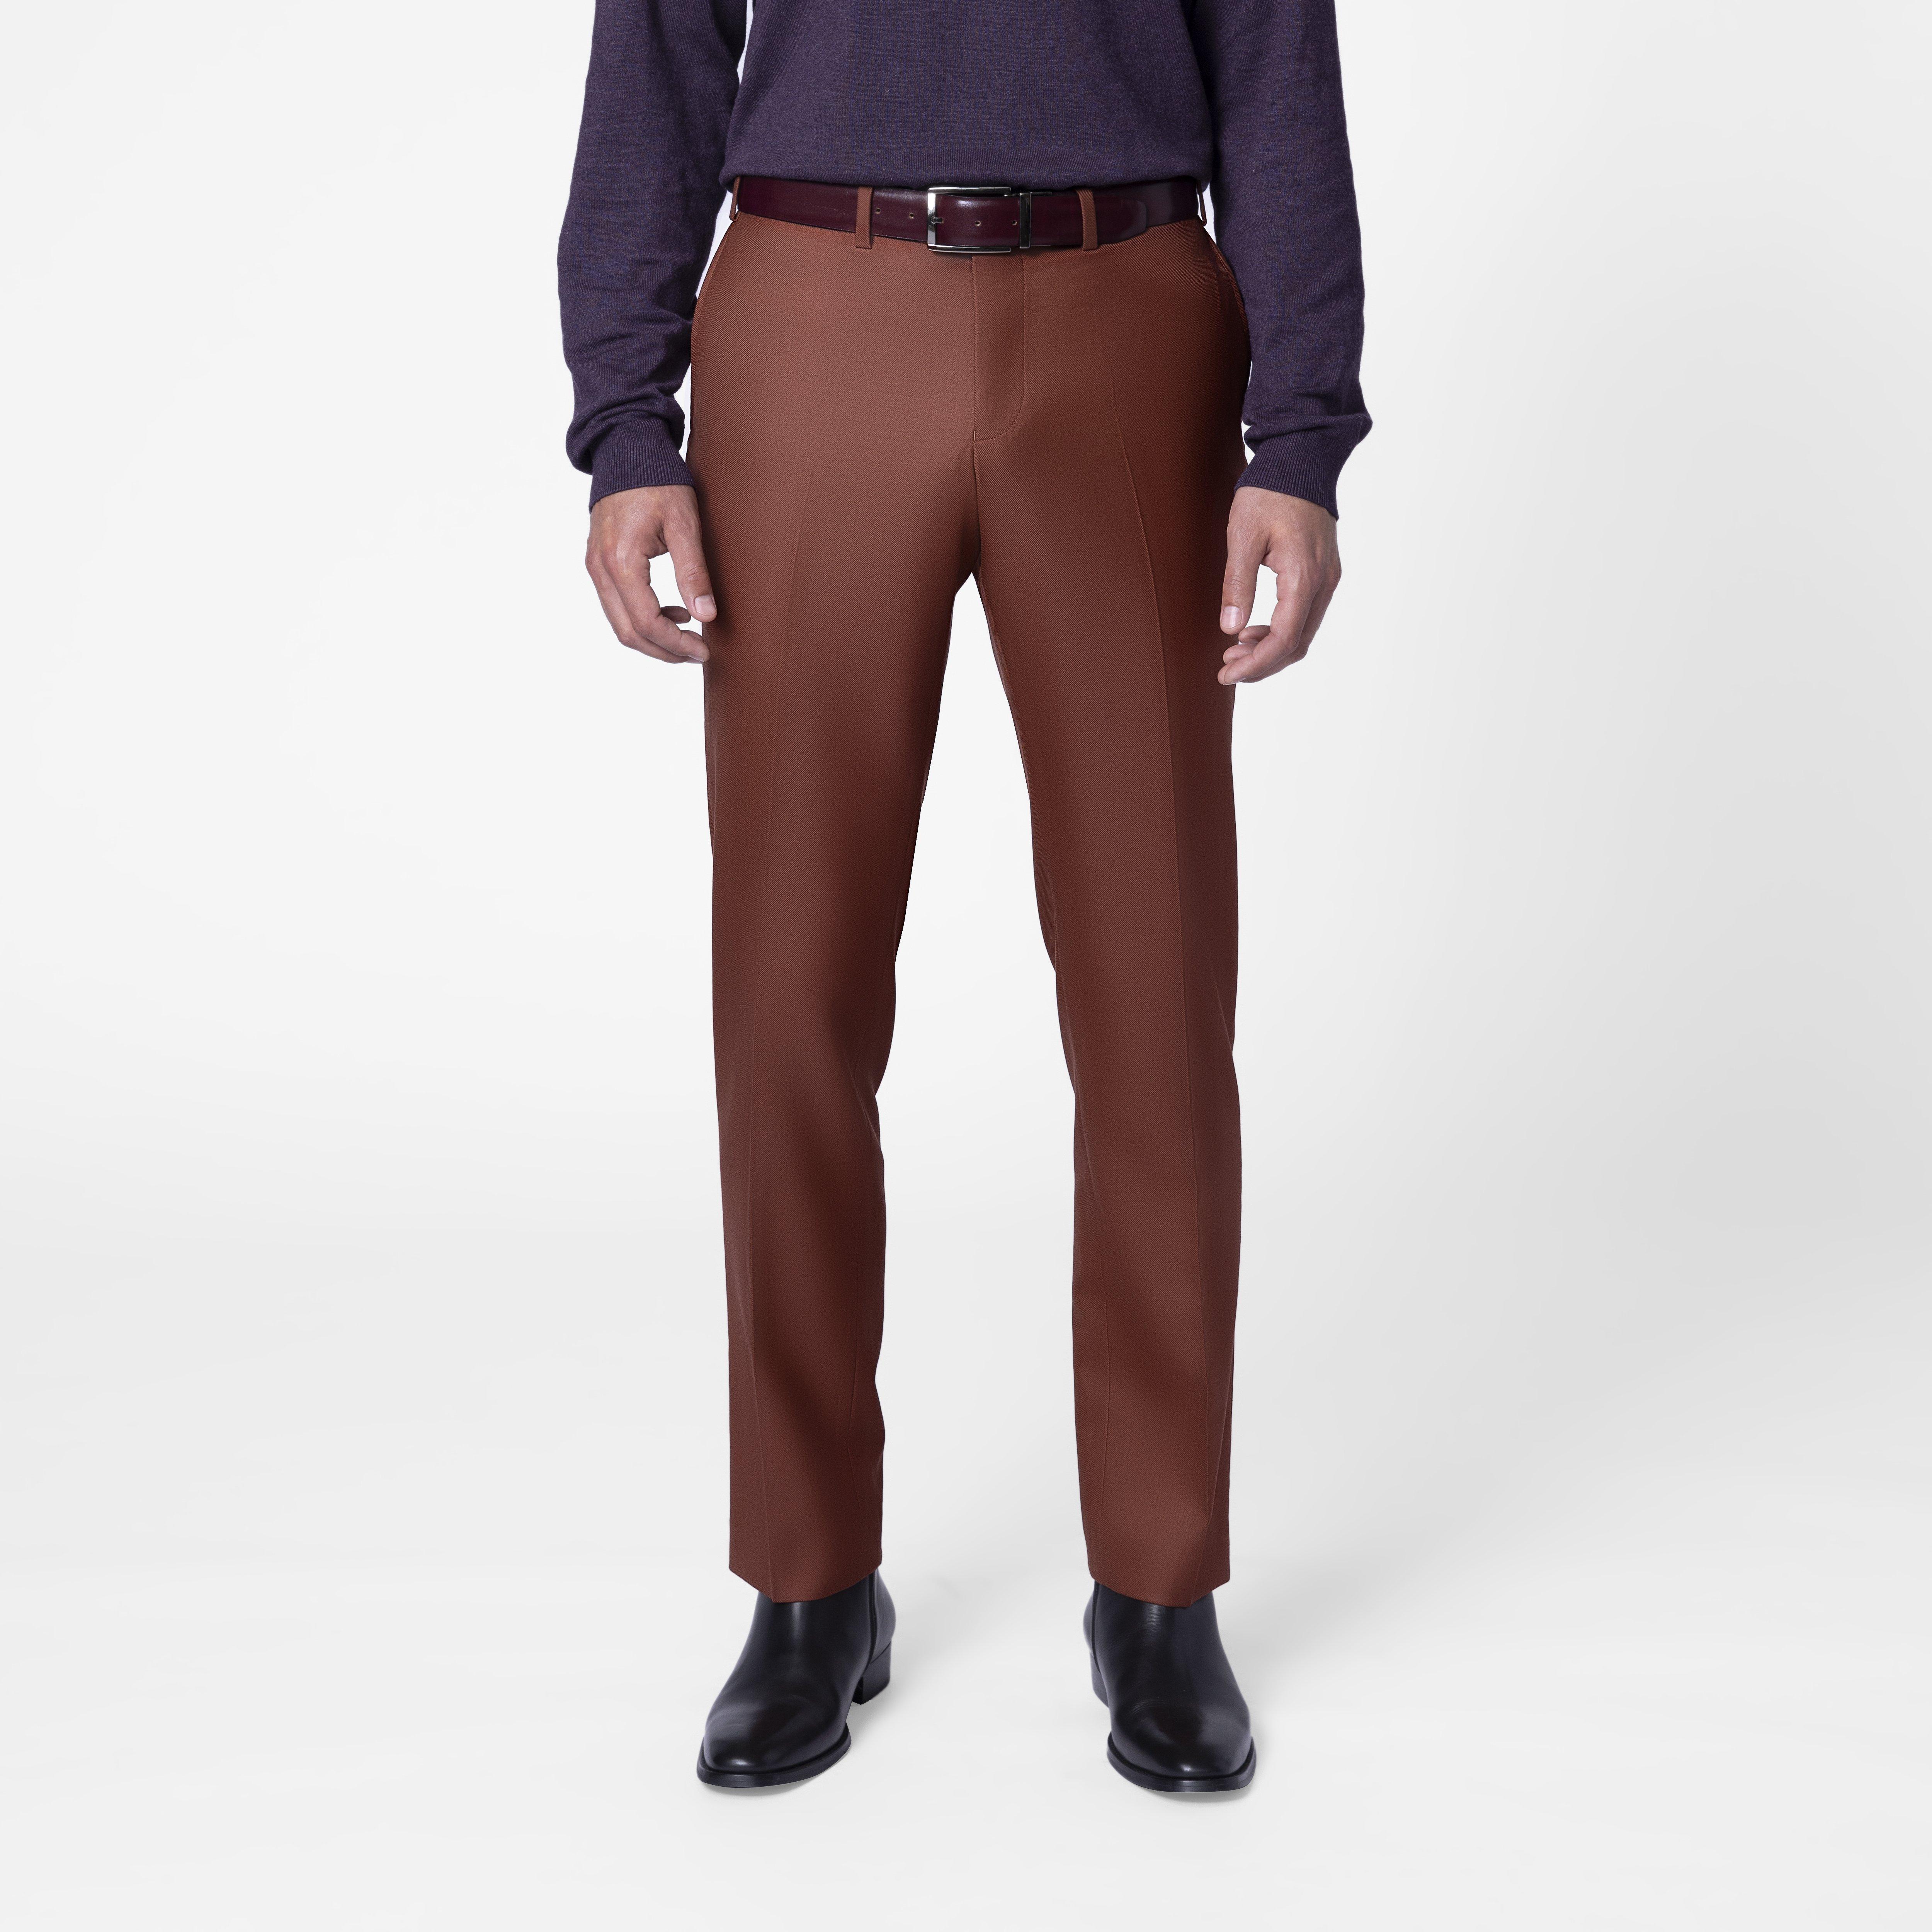 Custom Suits Made For You - Johnby Twill Rust Suit | INDOCHINO